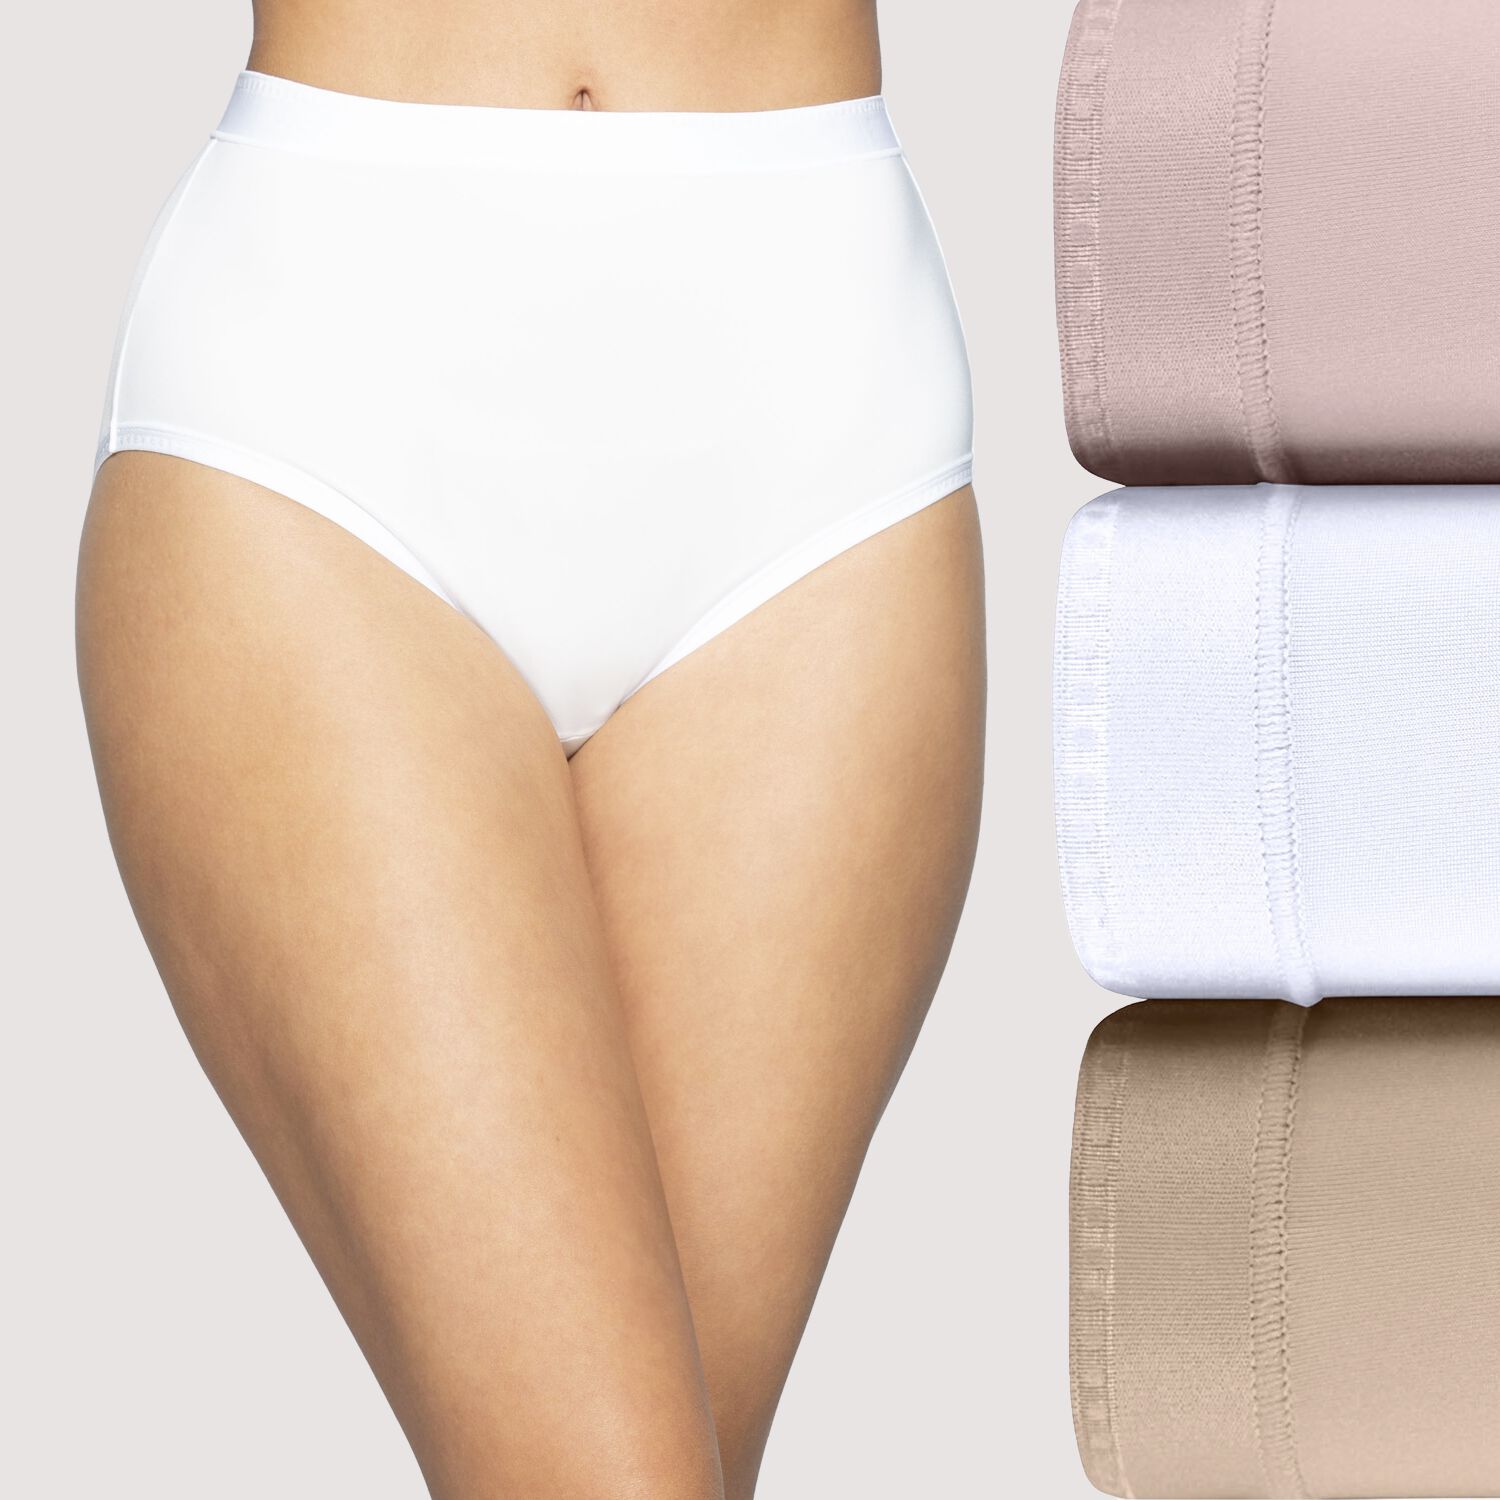 11 Pairs Of Underwear To Flaunt Under Baggy Jeans